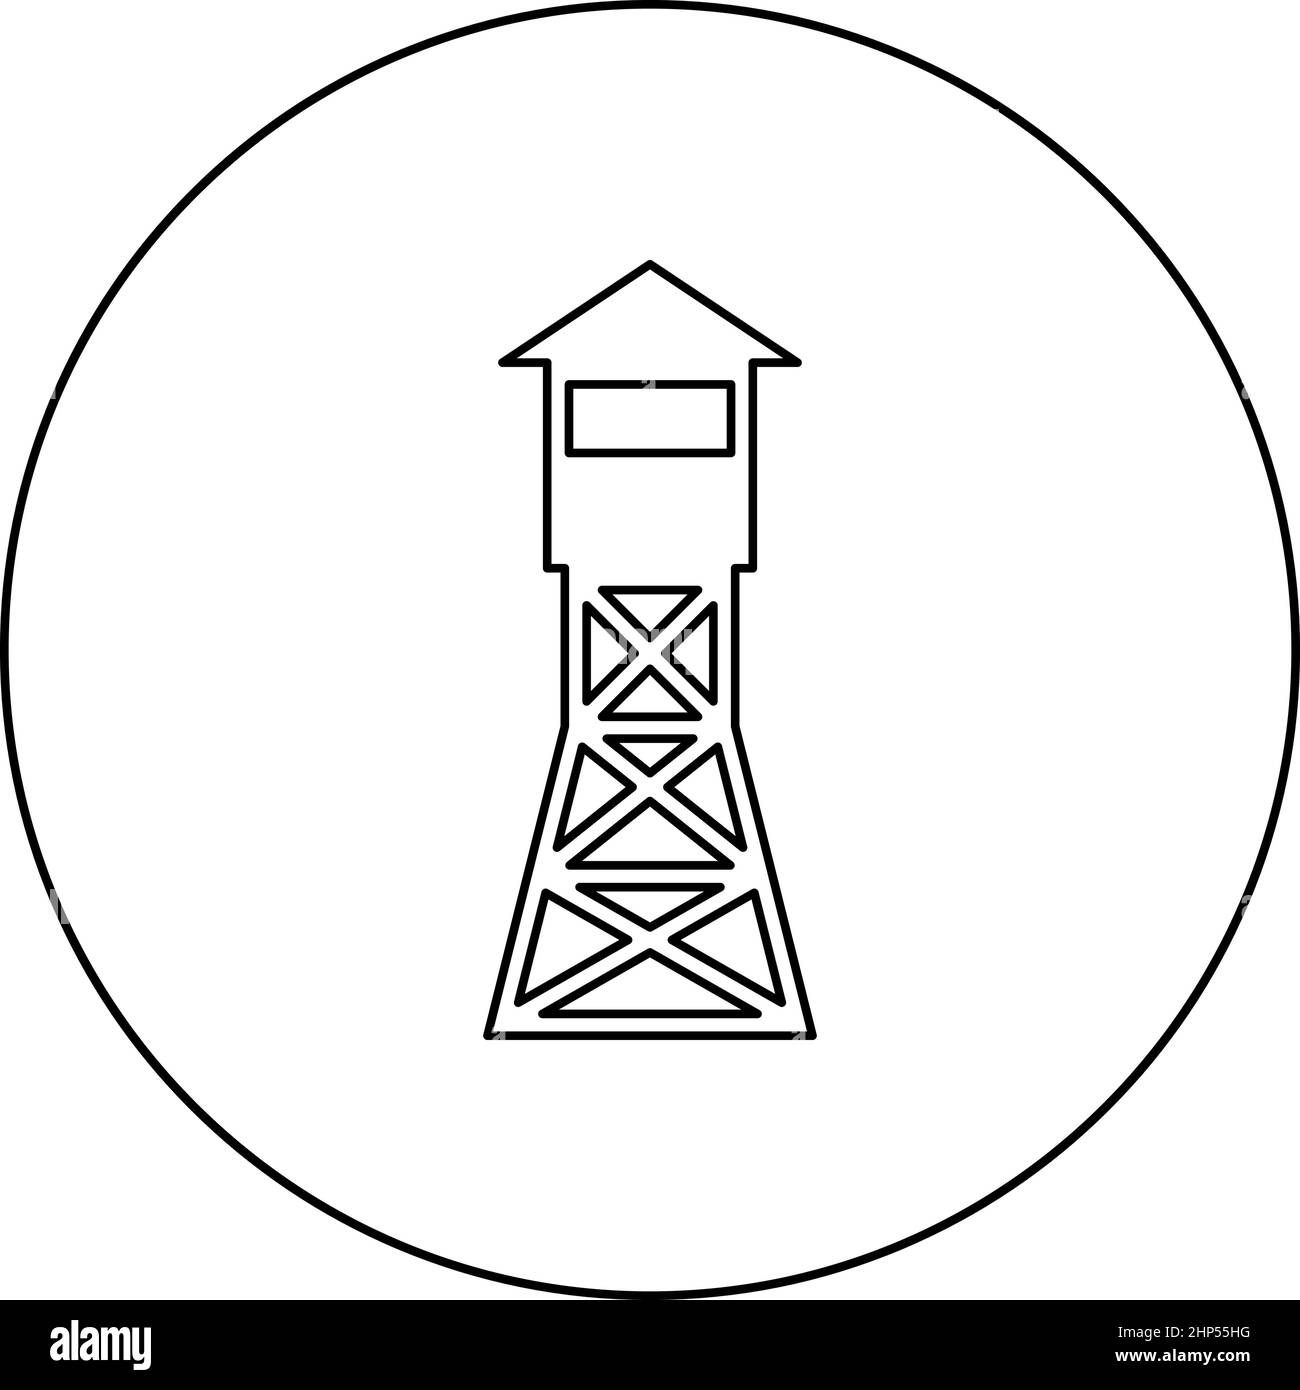 Watching tower Overview forest ranger fire site icon in circle round black color vector illustration solid outline style image Stock Vector